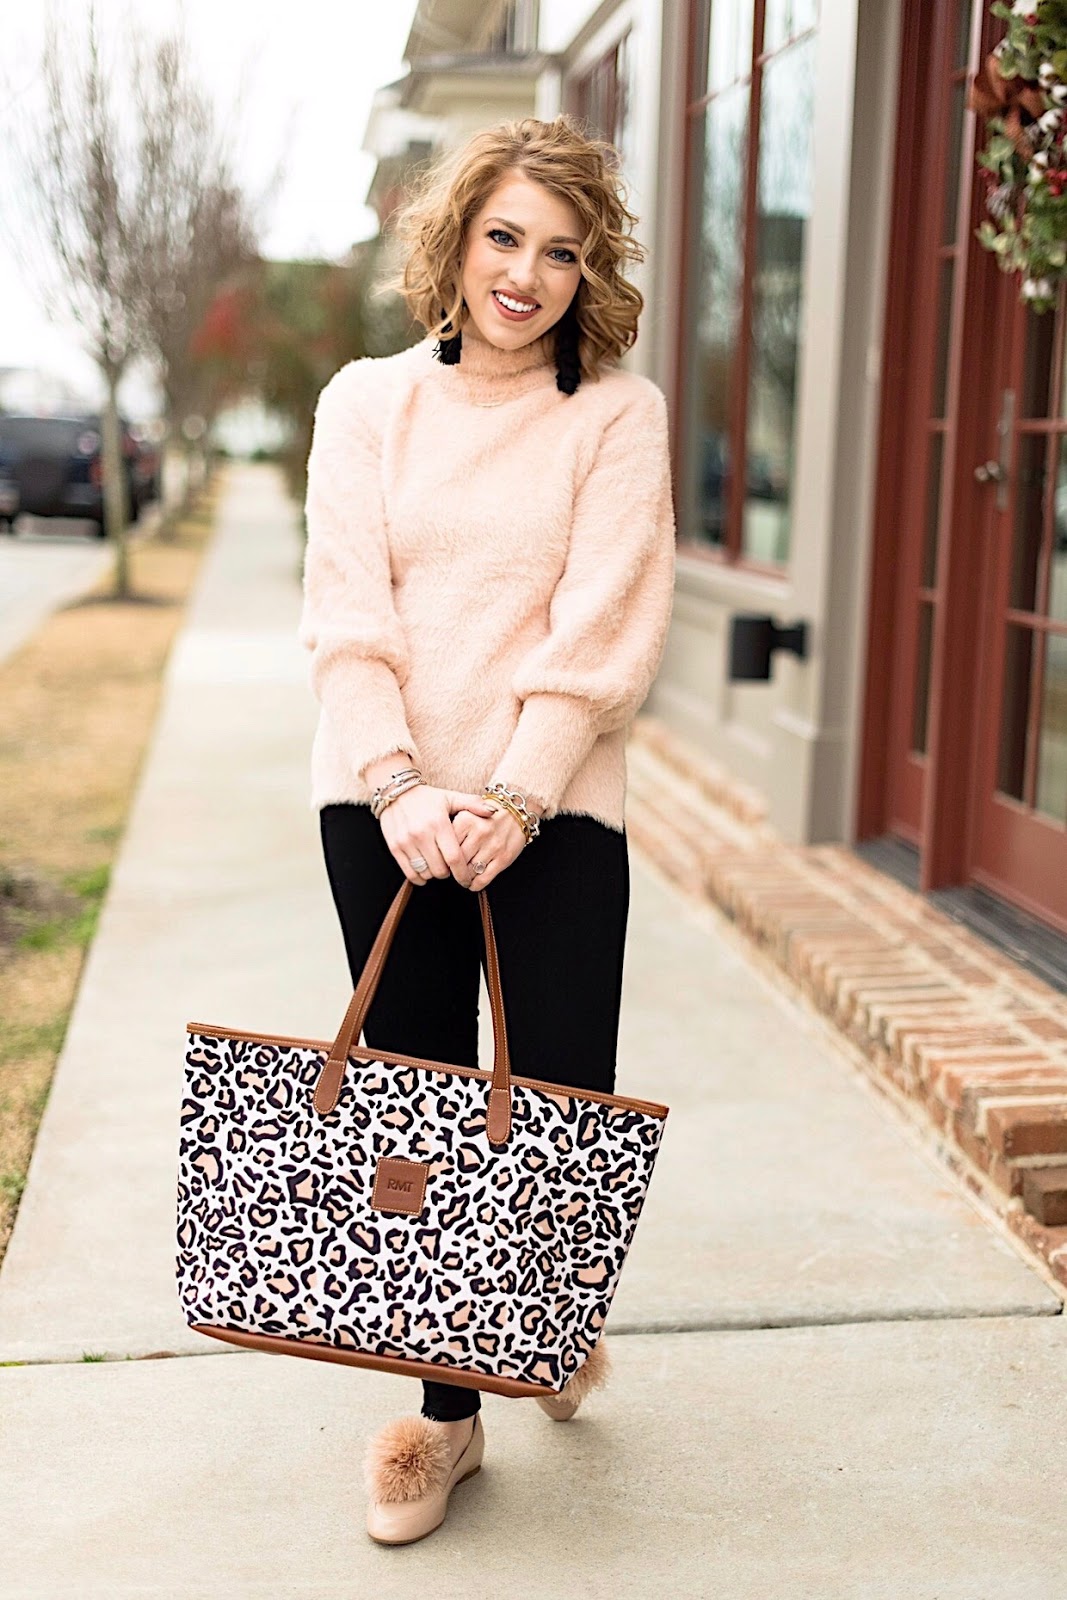 Black, Pink and Leopard Winter Look - SOMETHING DELIGHTFUL BLOG